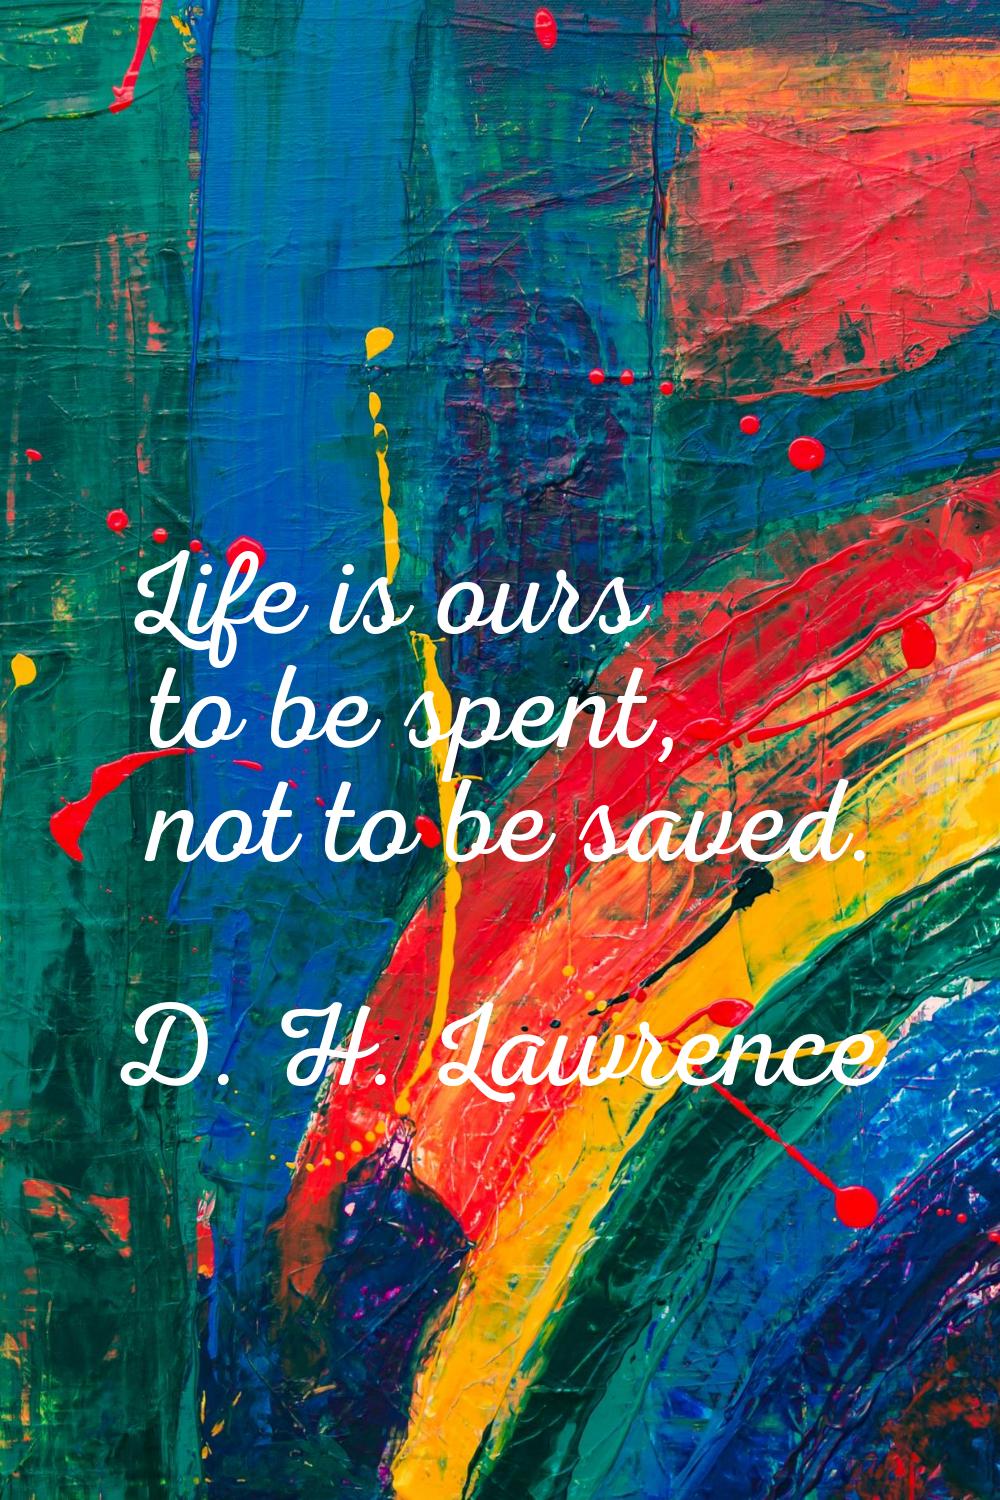 Life is ours to be spent, not to be saved.